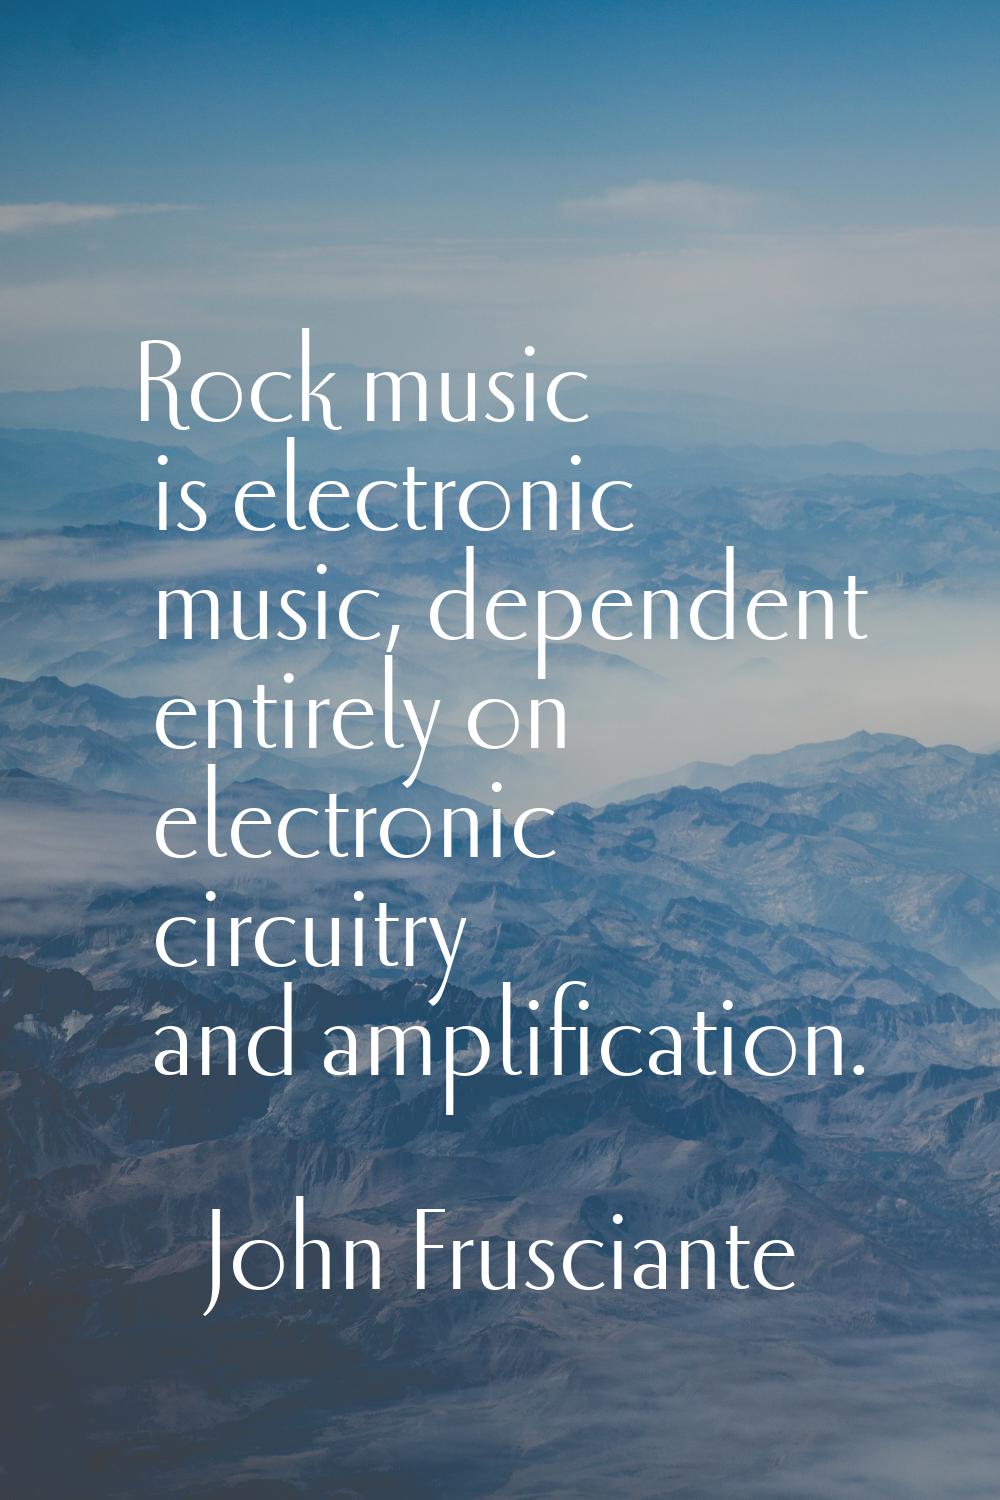 Rock music is electronic music, dependent entirely on electronic circuitry and amplification.